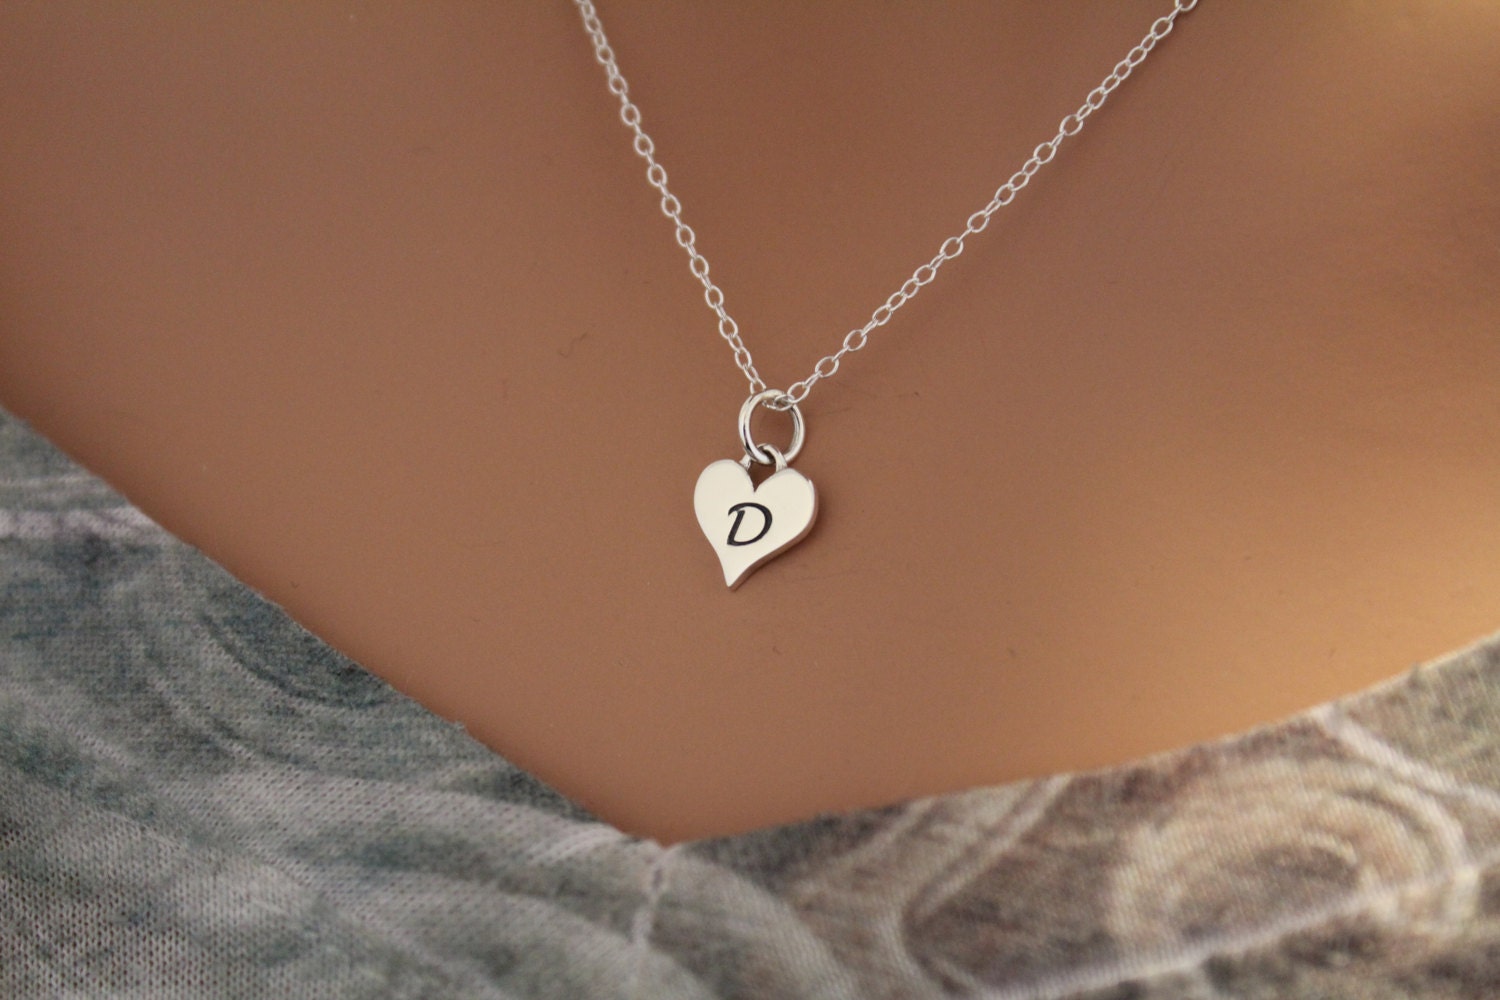 Buy Sterling Silver D Letter Heart Necklace Silver Tiny Stamped D ...